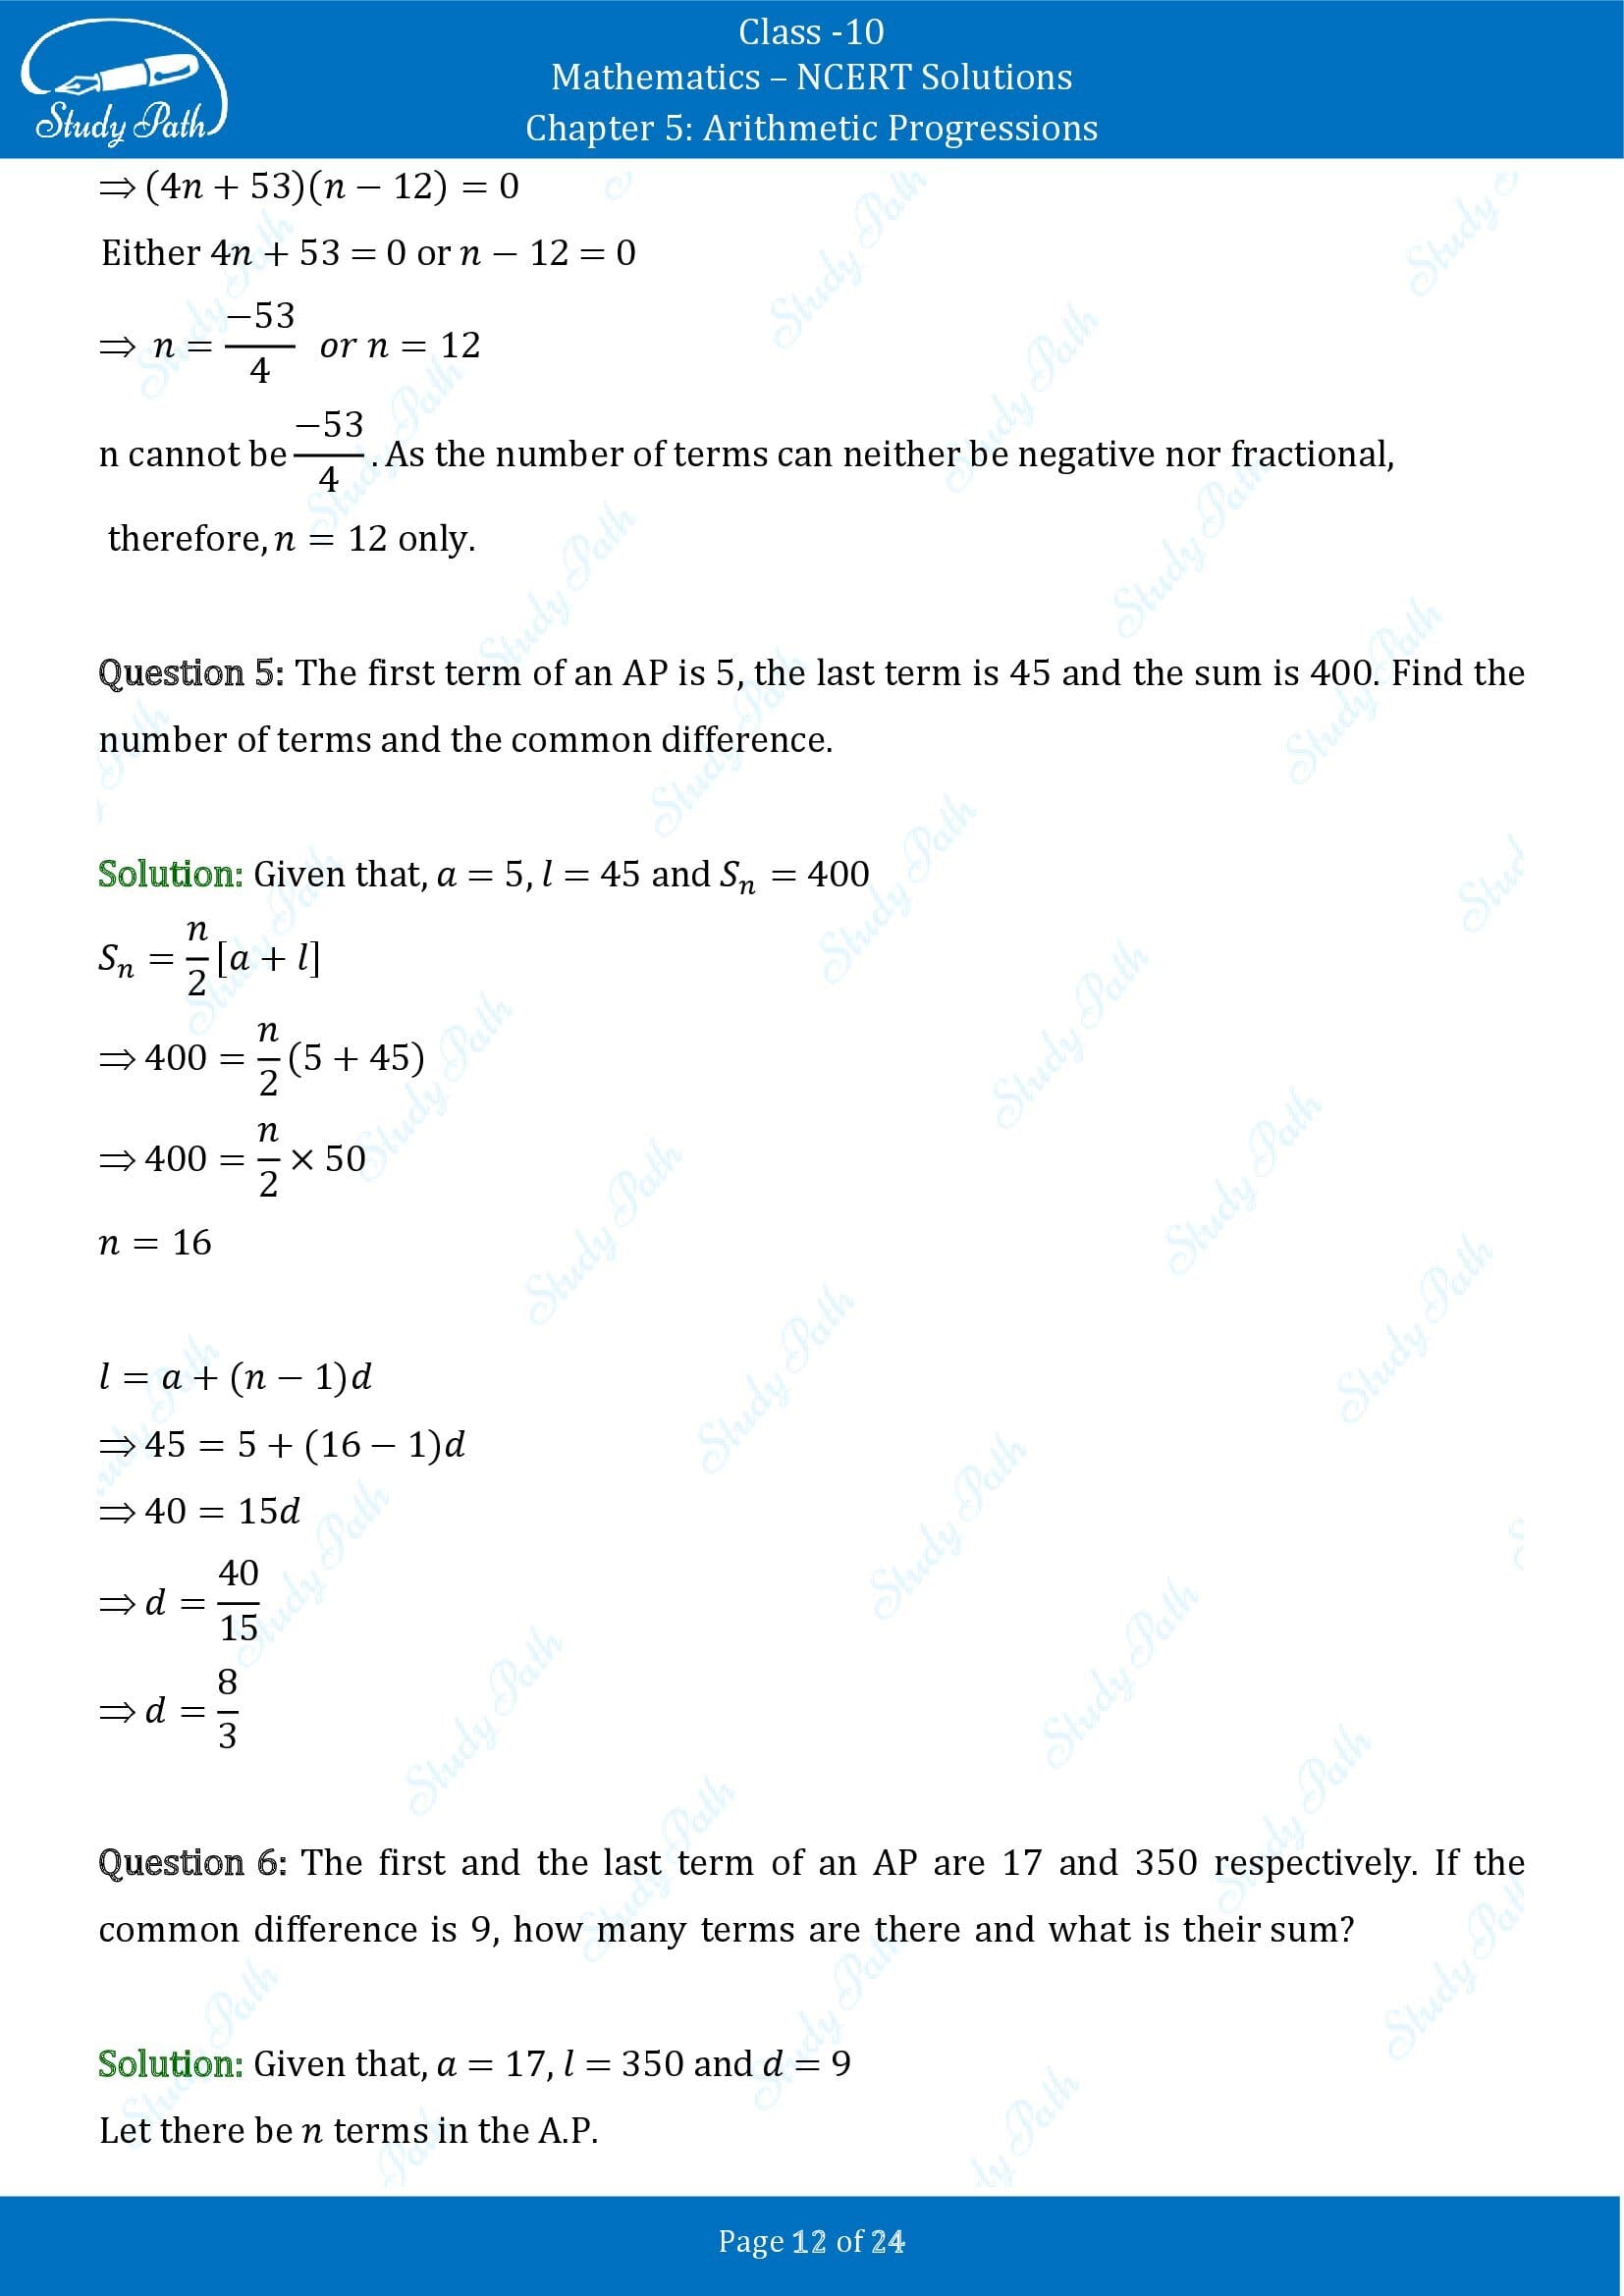 NCERT Solutions for Class 10 Maths Chapter 5 Arithmetic Progressions Exercise 5.3 00012